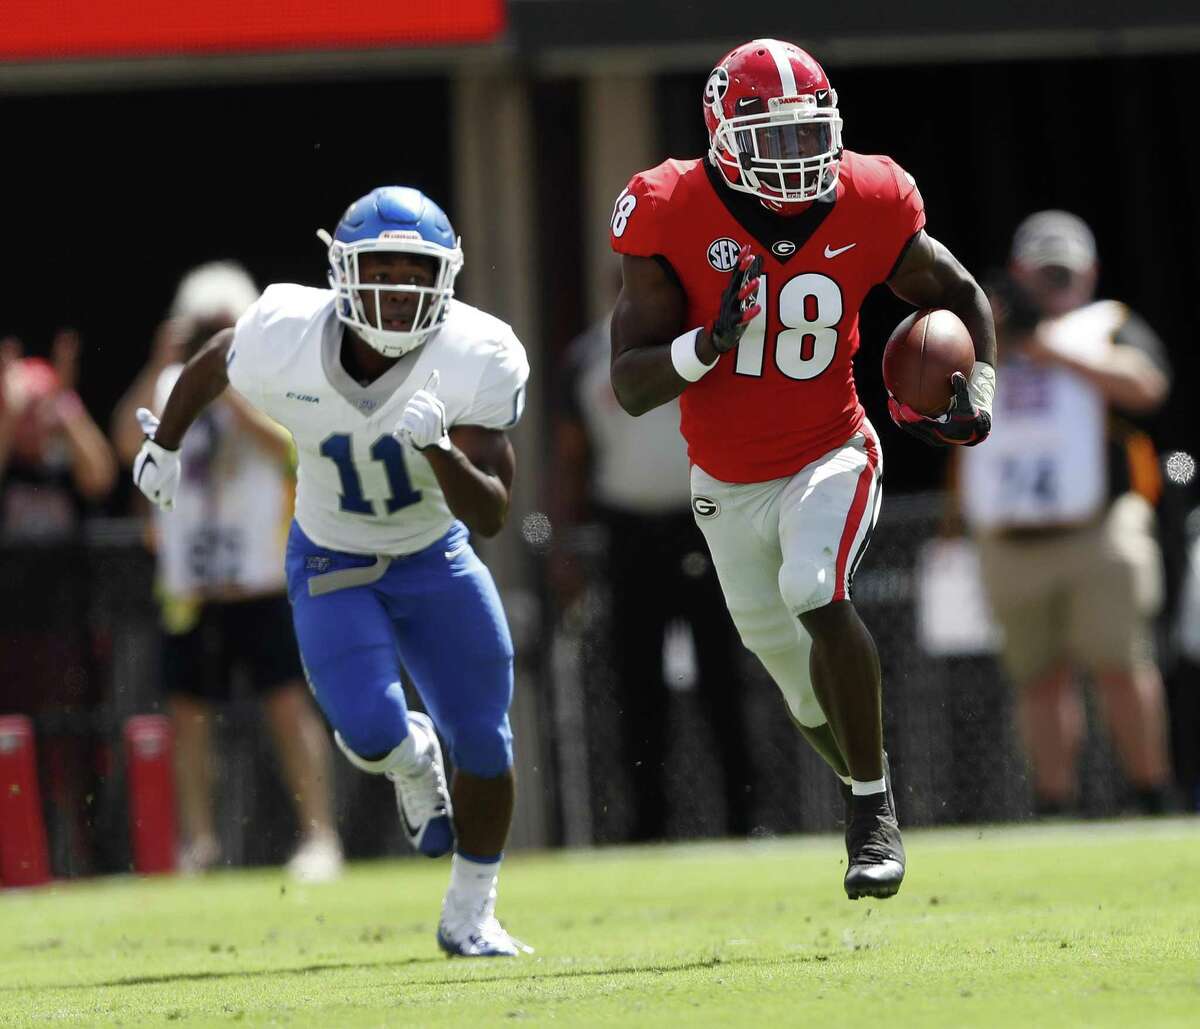 Georgia defensive back Deandre Baker is expected to start immediately after being taken in the NFL draft.